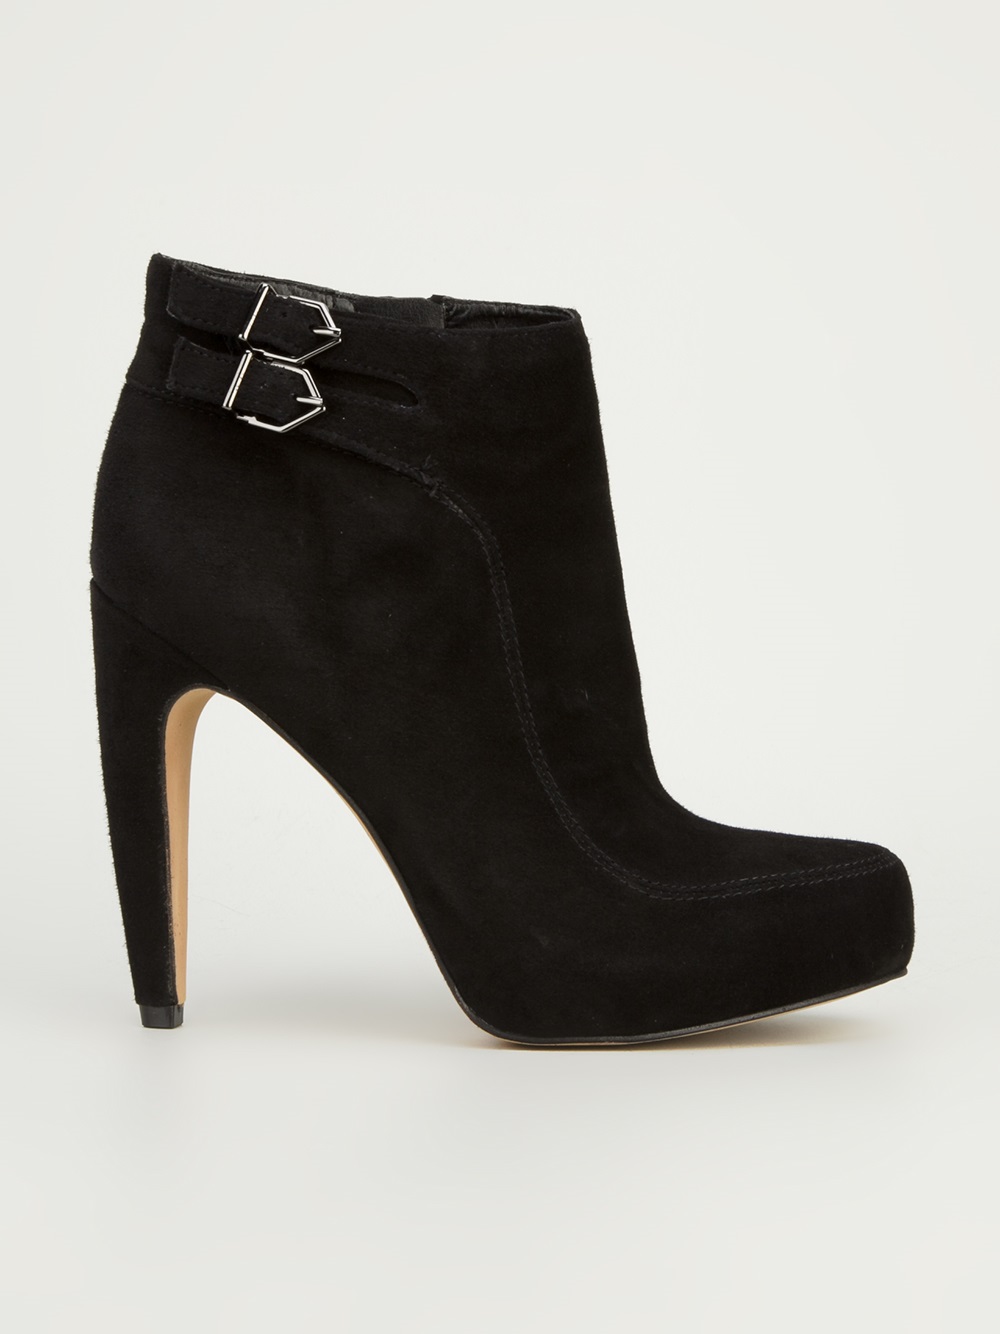 Lyst - Sam Edelman Suede Ankle Boot in Black